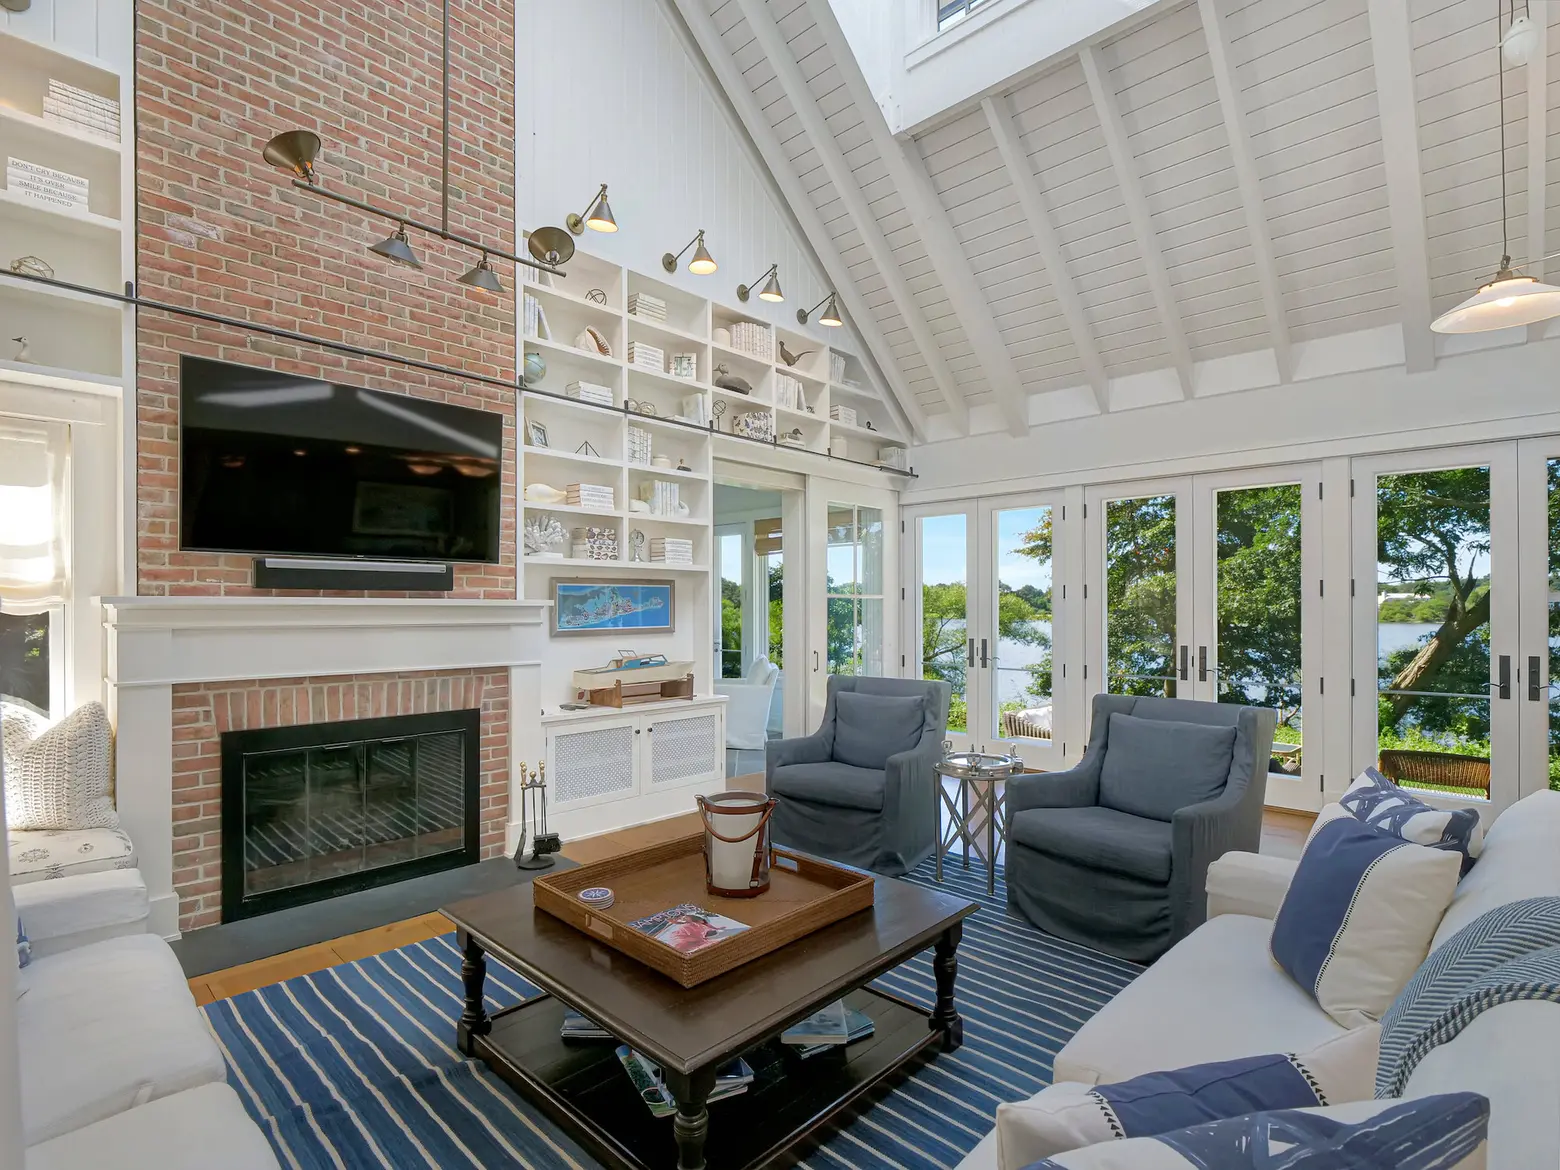 $5.95M pond-front home in Sagaponack nails the nautical-farmhouse look